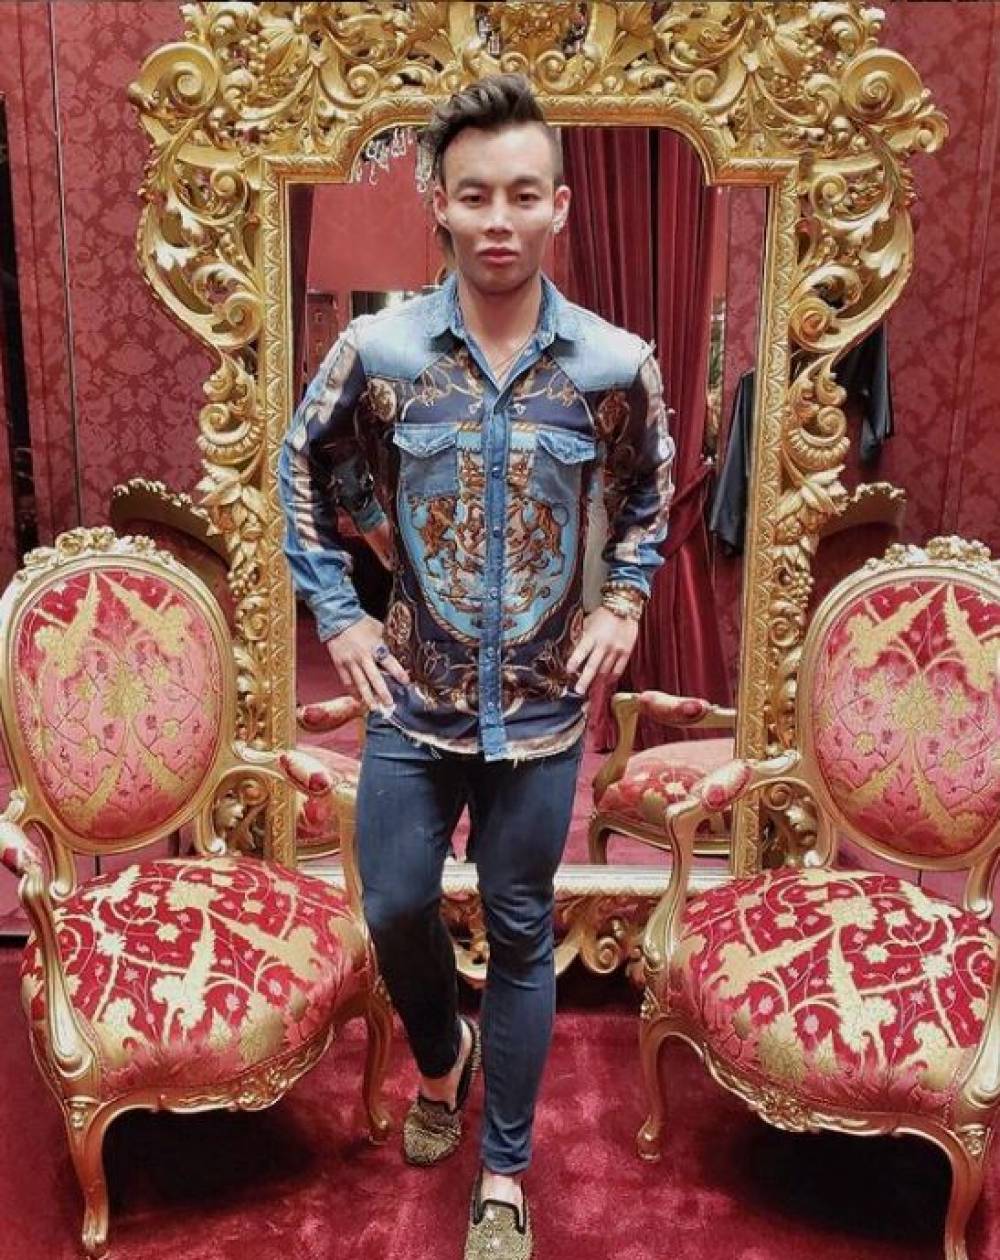 Bling Empire Star Kane Lim’s Shoe Collection Worth More Than US$365,000